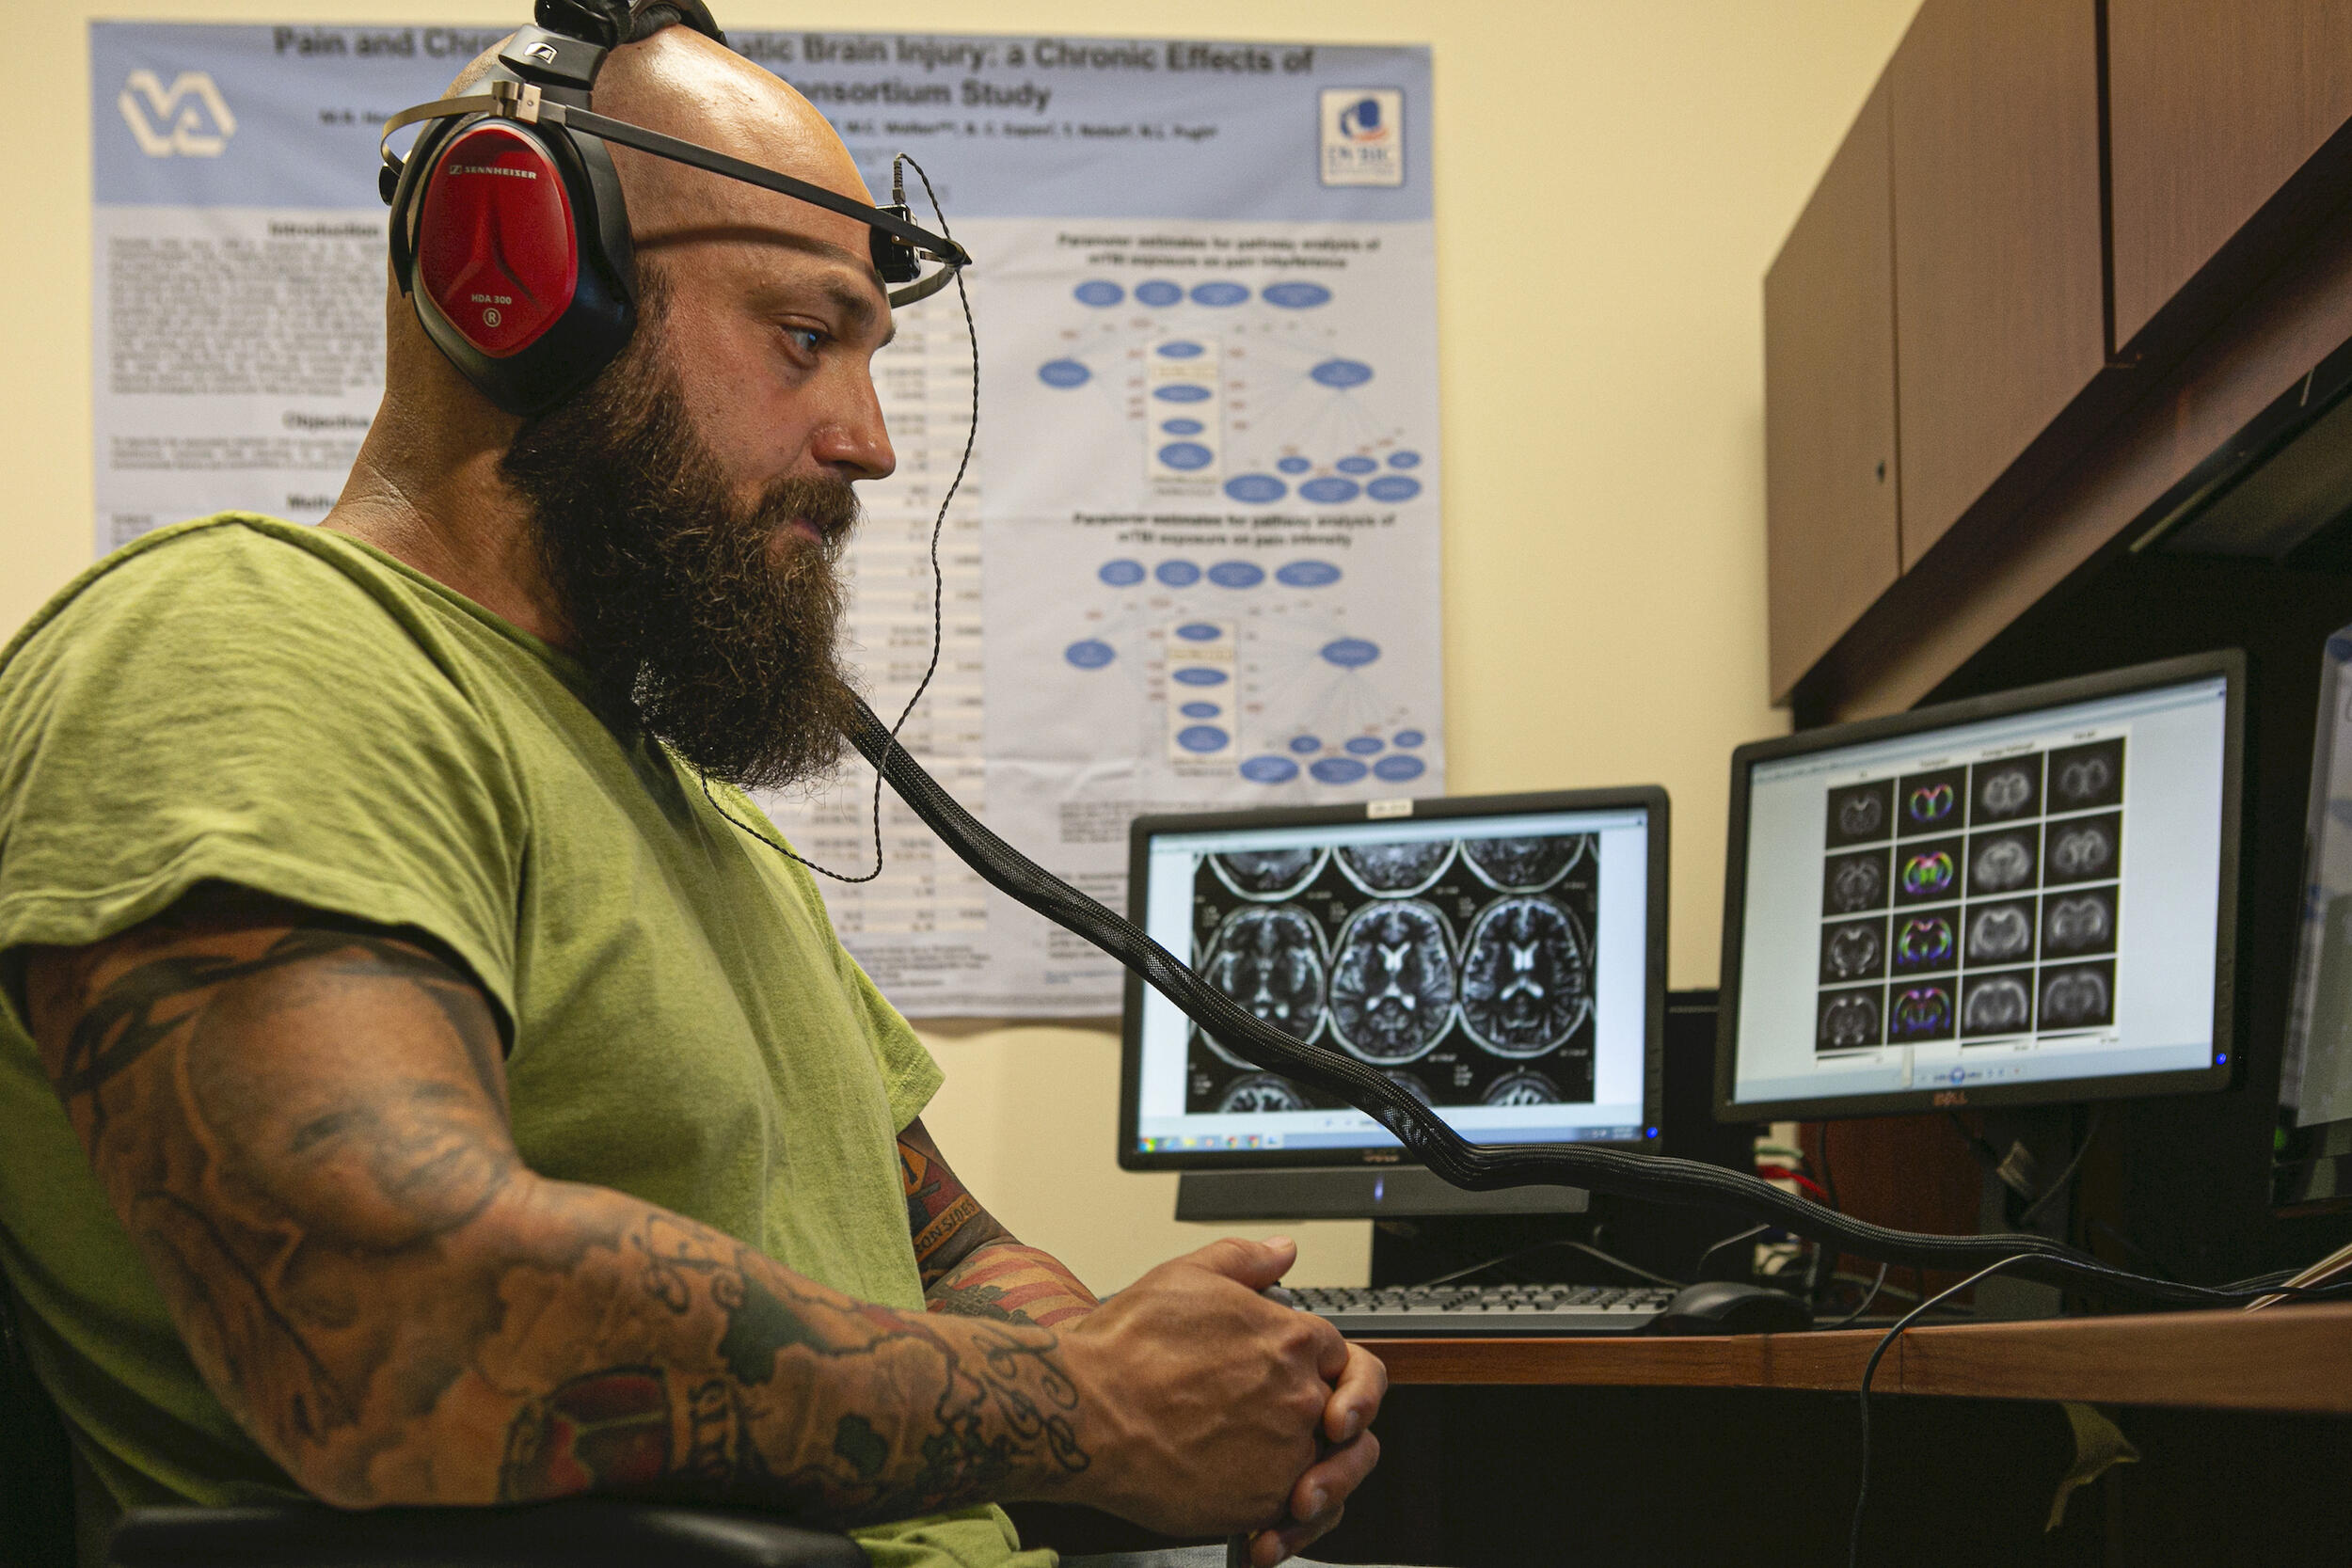 A person wearing headphones and a band around their head sits in a chair. Computer screens display images of brain scans.